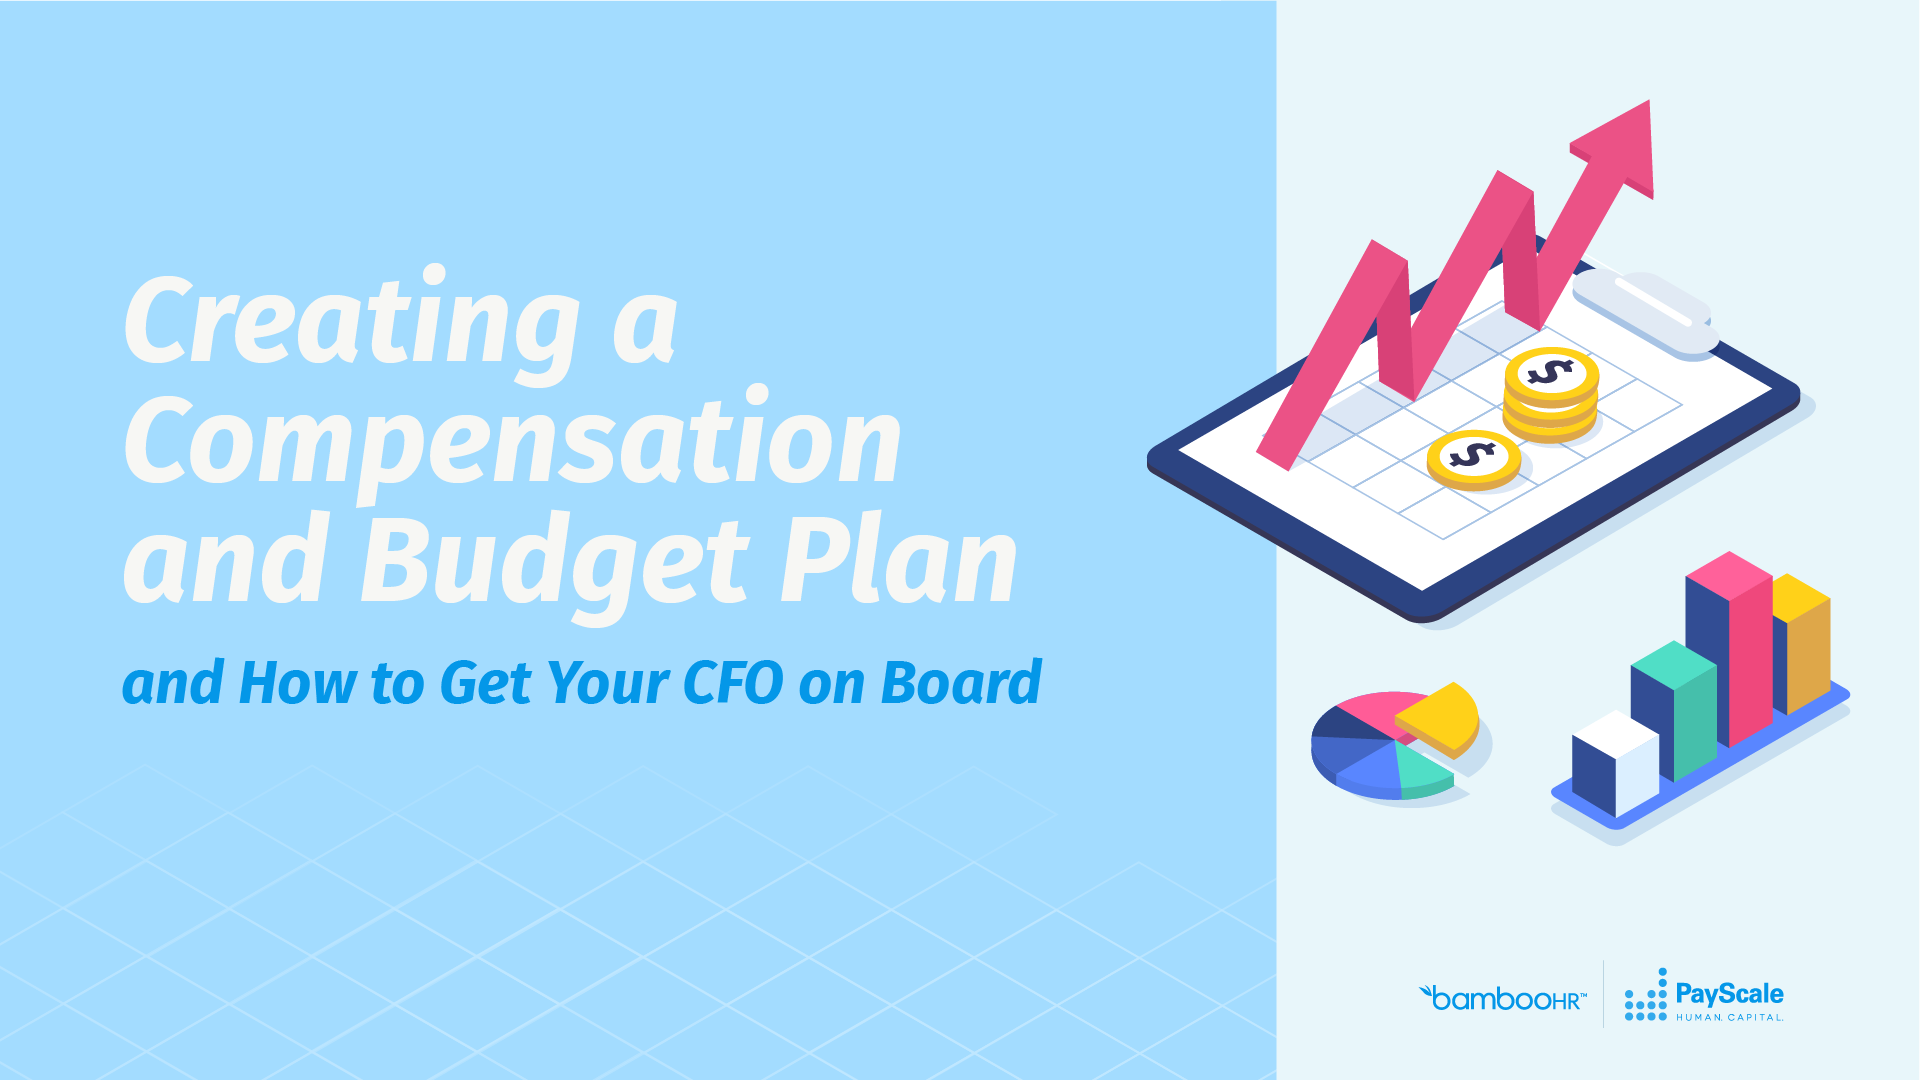 Creating a Compensation and Budget Plan (and How to Get Your CFO on Board)